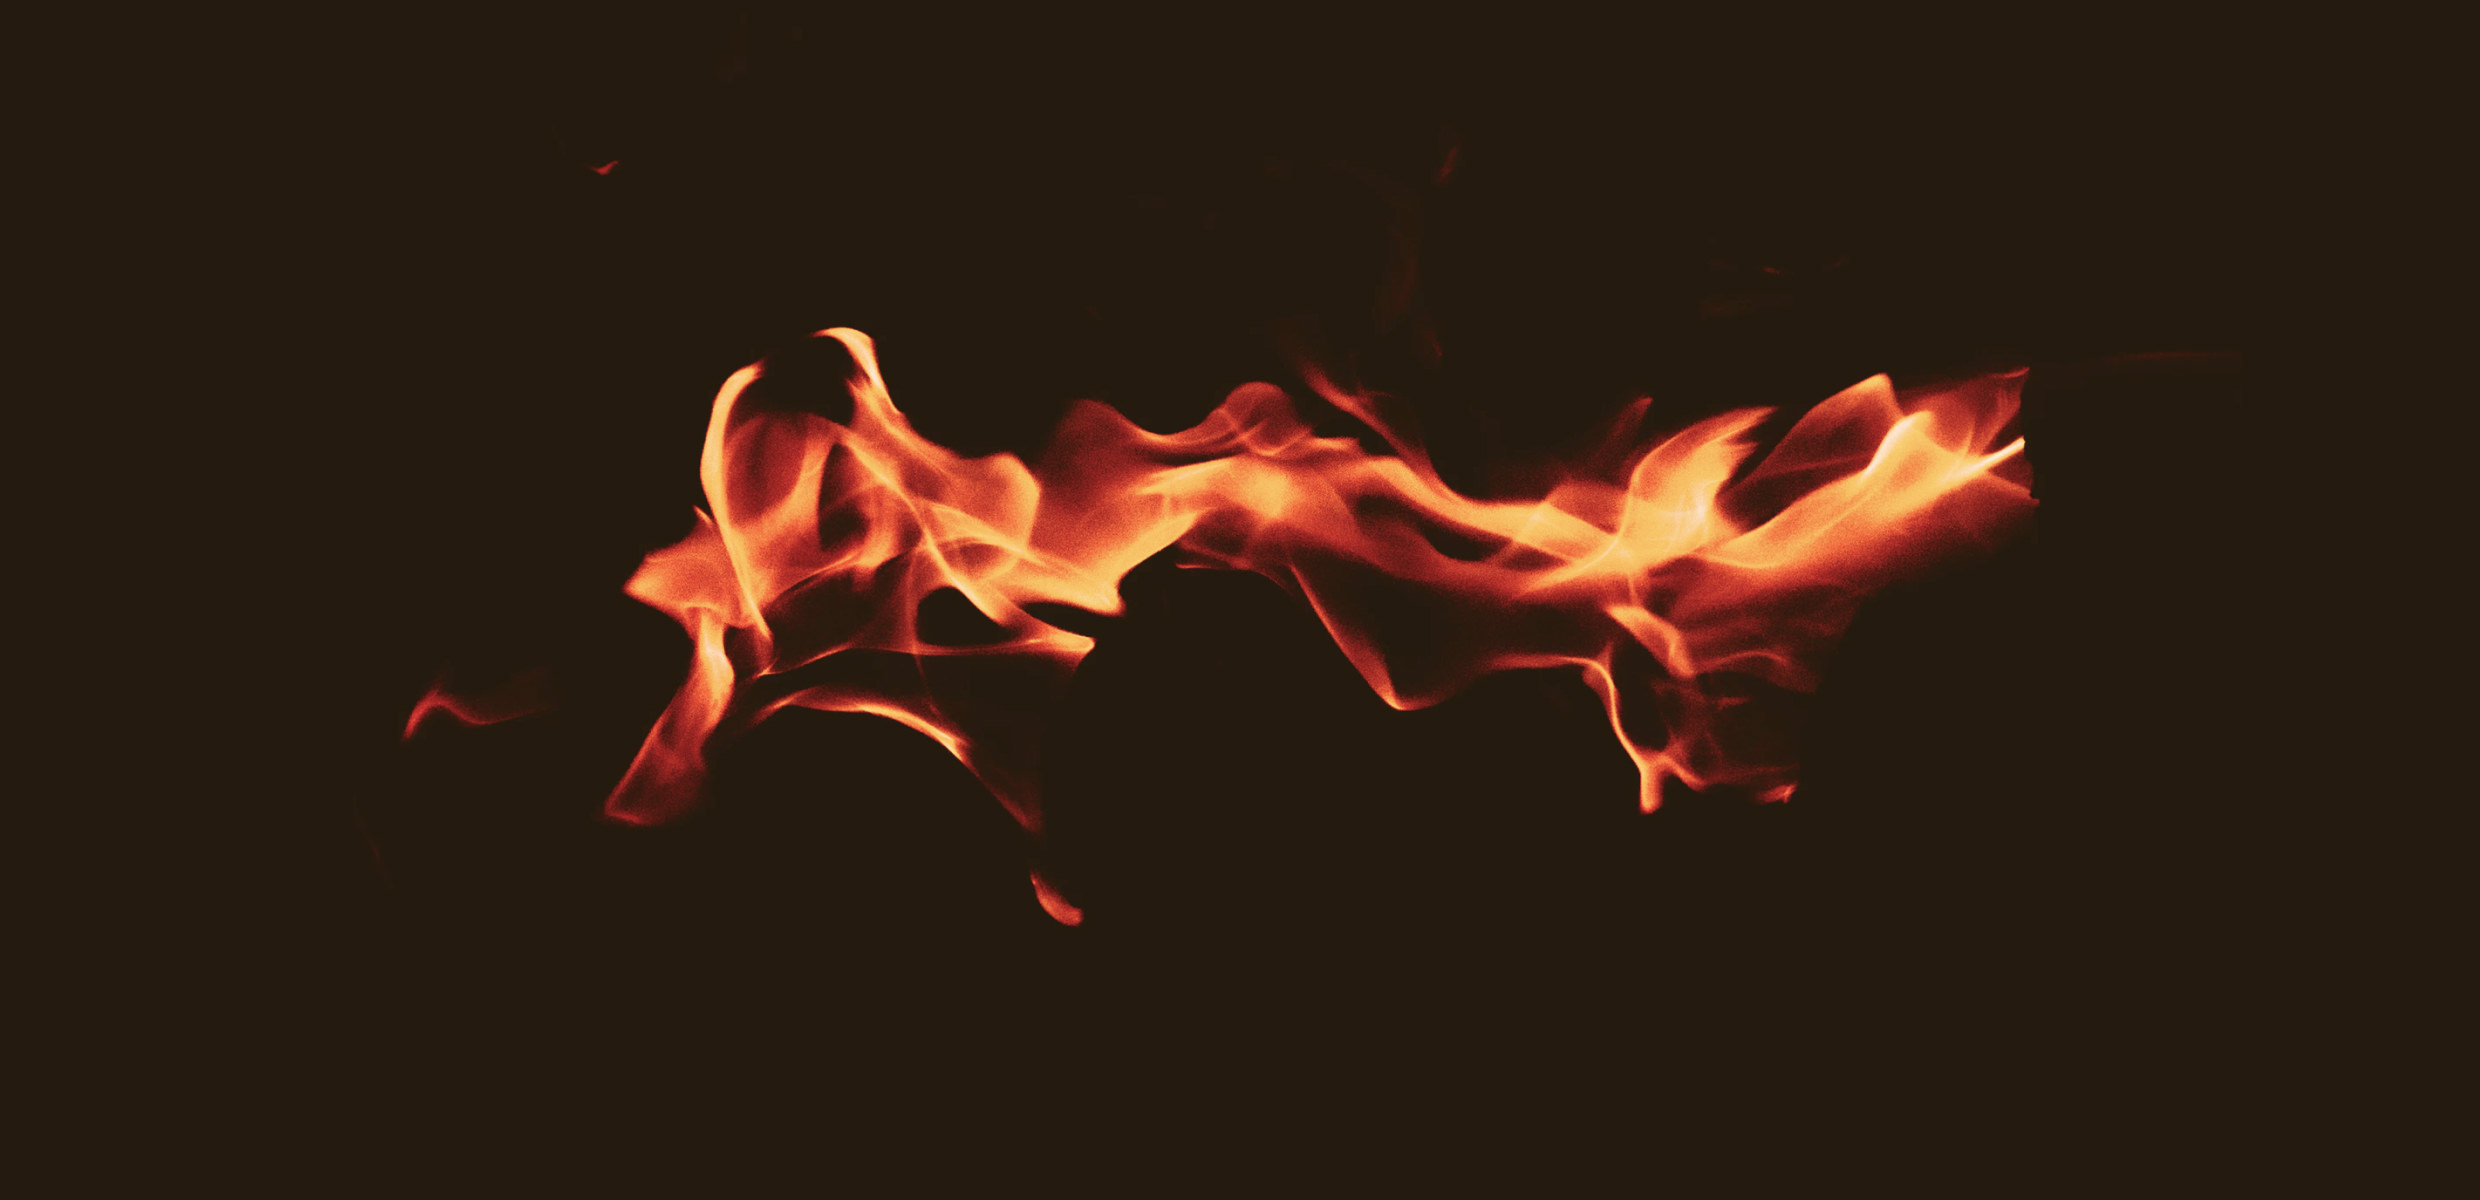 21 Eye Catching Fire Video Effects To Heat Up Your Content